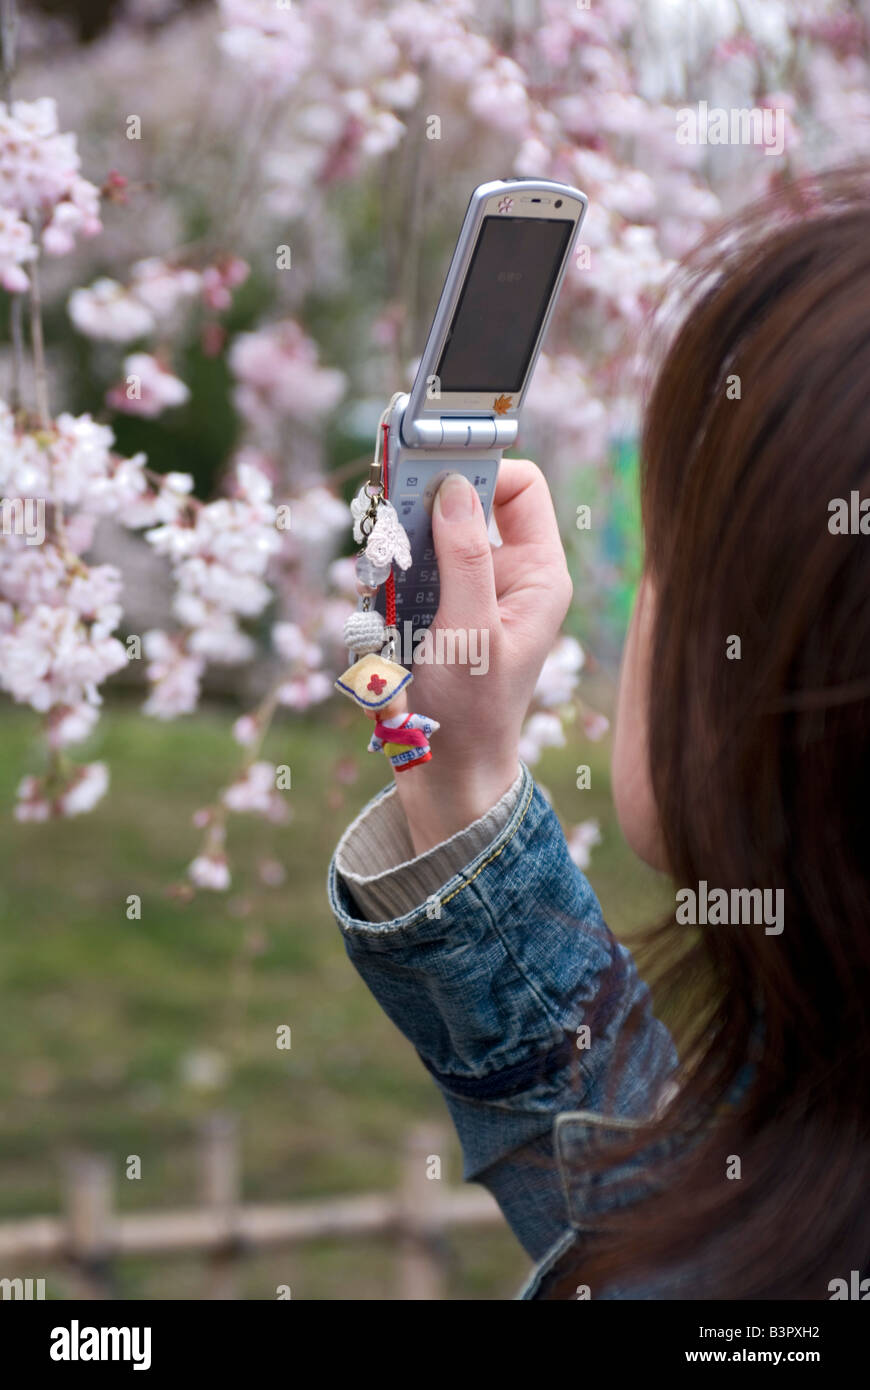 Girl using a mobile phone camera to photograph cherry blossoms at Maruyama Park in Kyoto Stock Photo